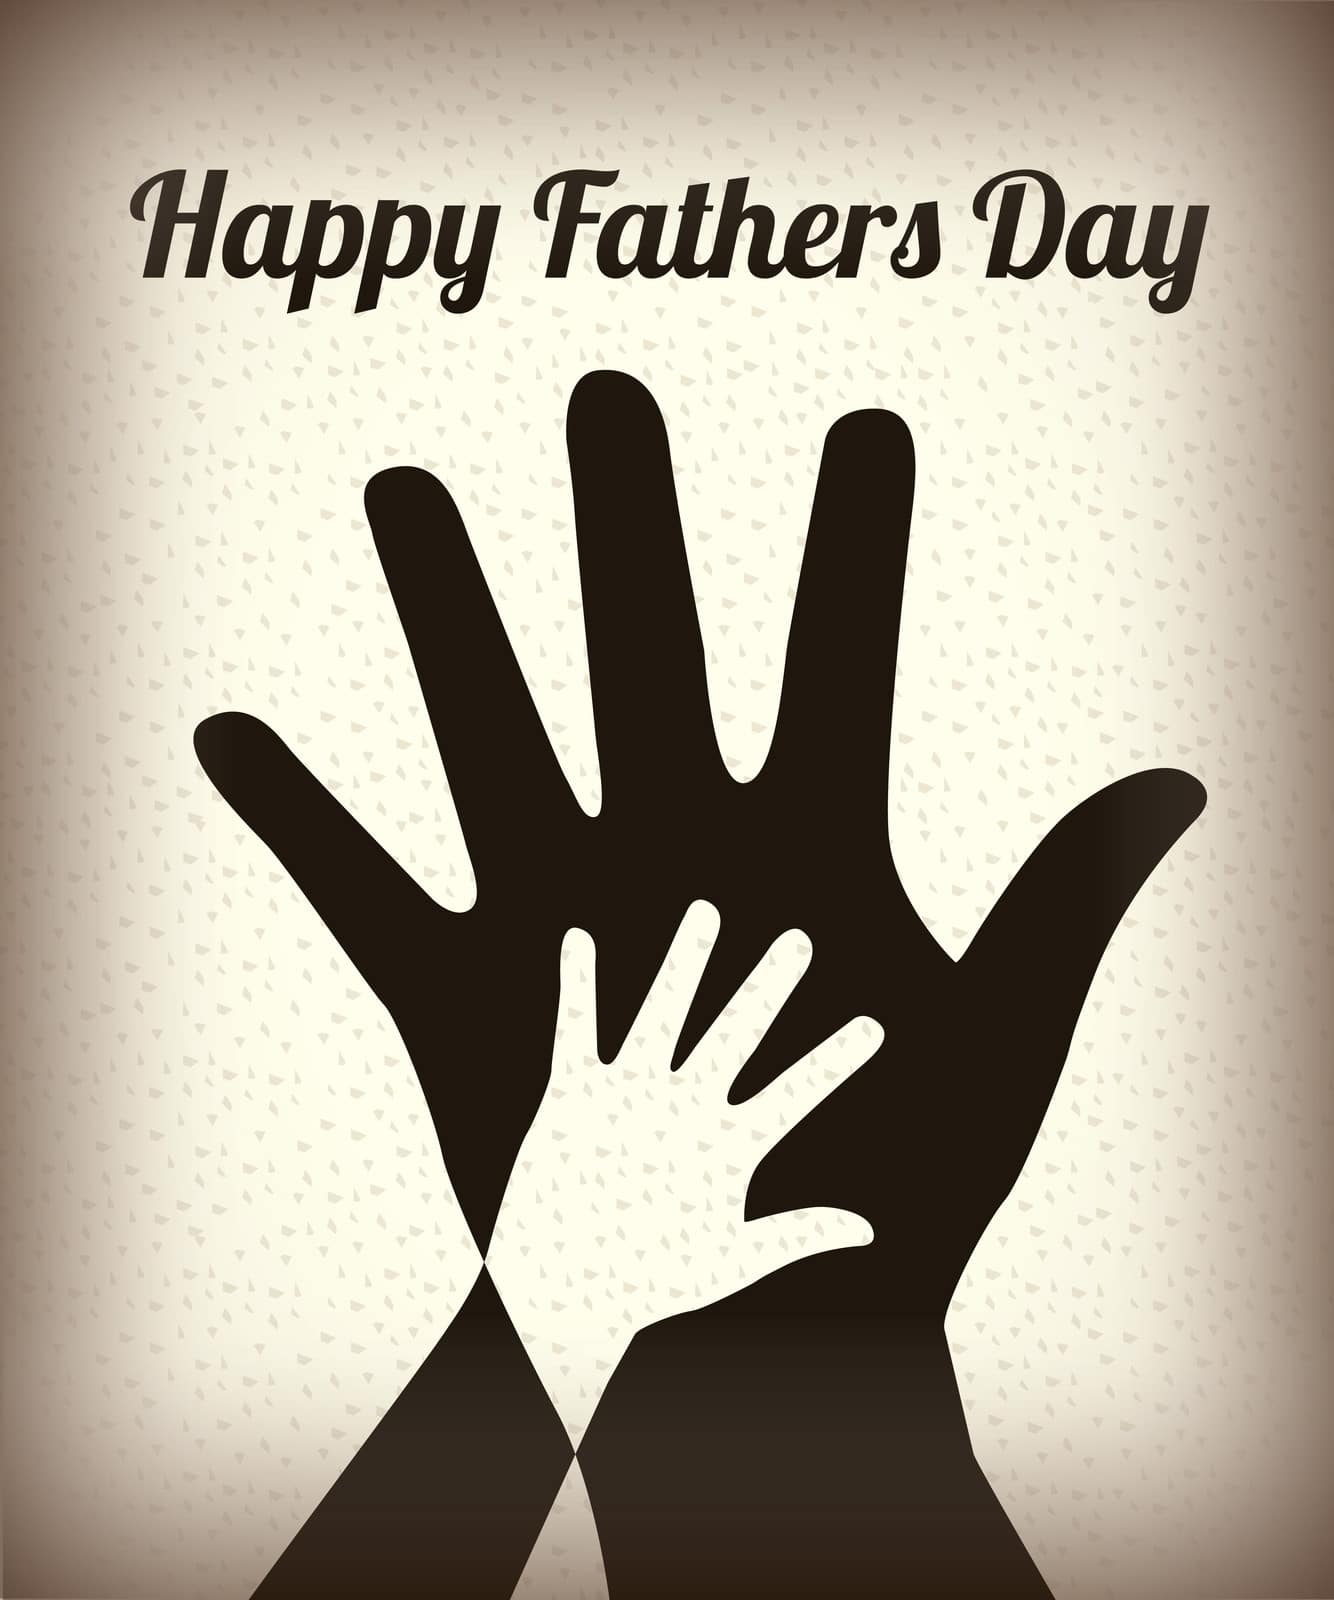 Best Fathers Day Image, Wishes, Wallpaper, Quotes and Messages